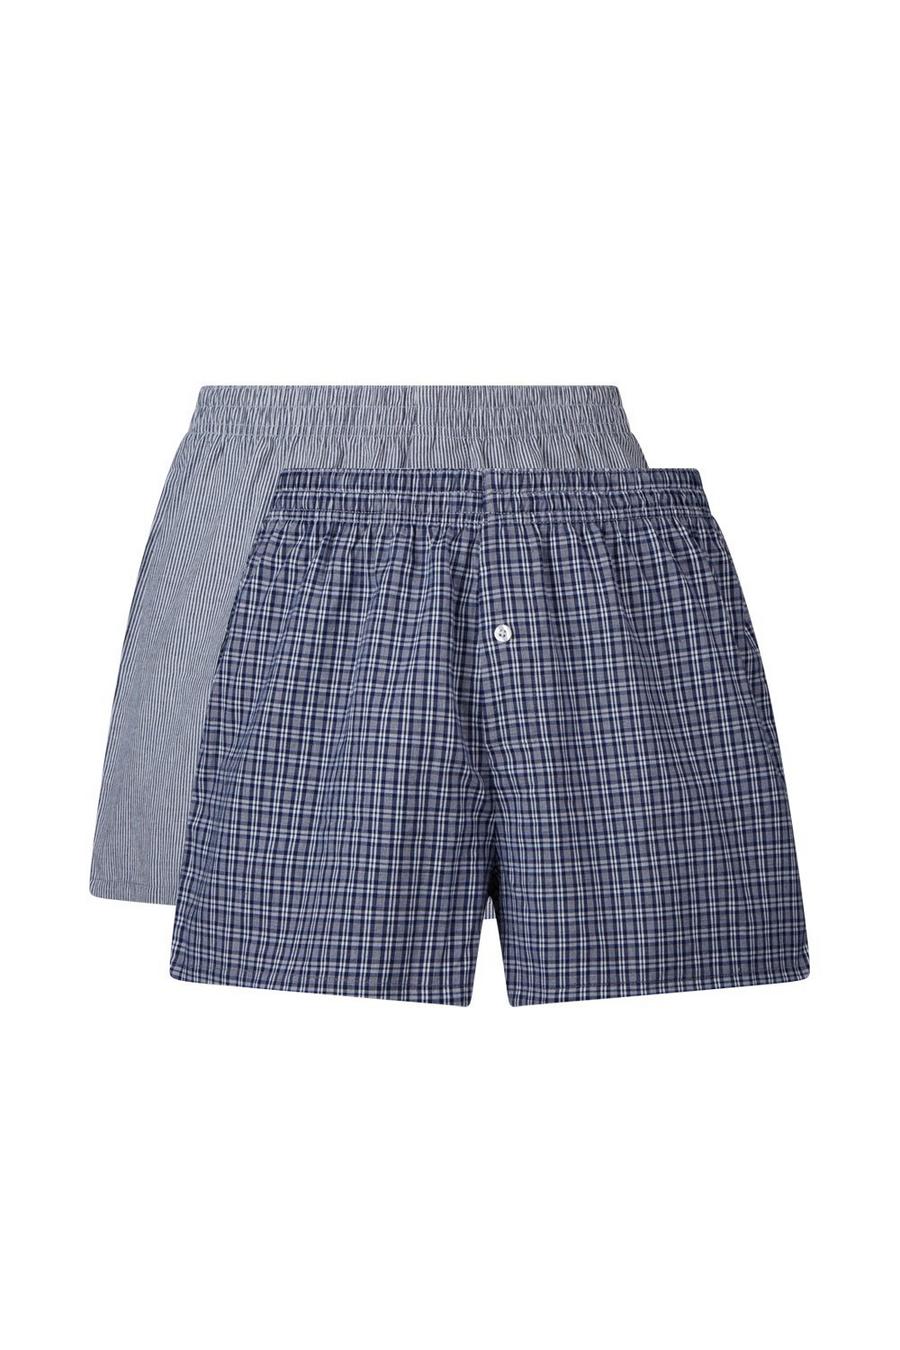 2 Pack Woven Navy Design Boxers 